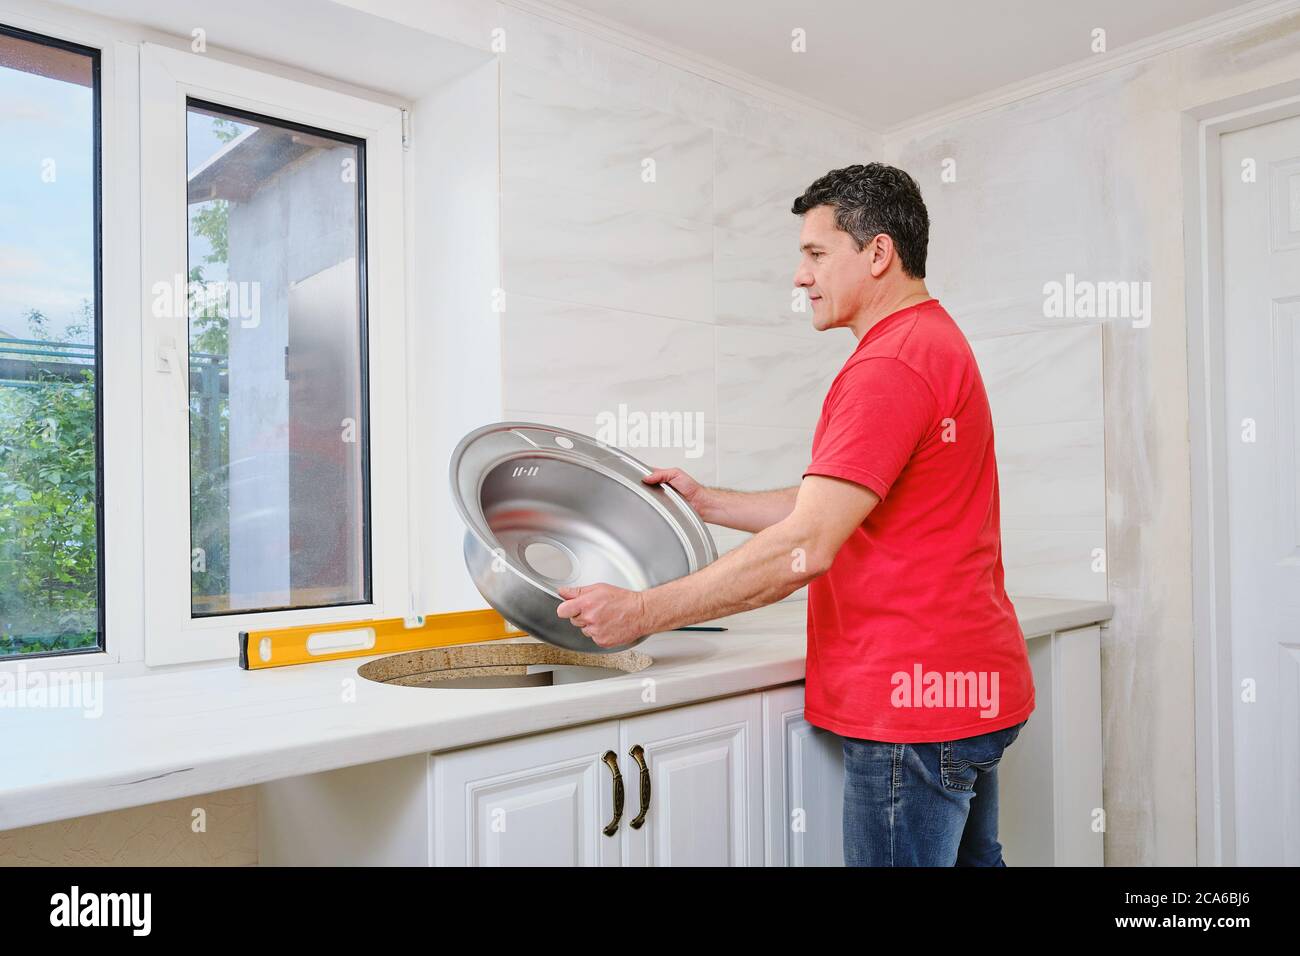 white man installs round single stainless steel sink into a cut-out hole  Stock Photo